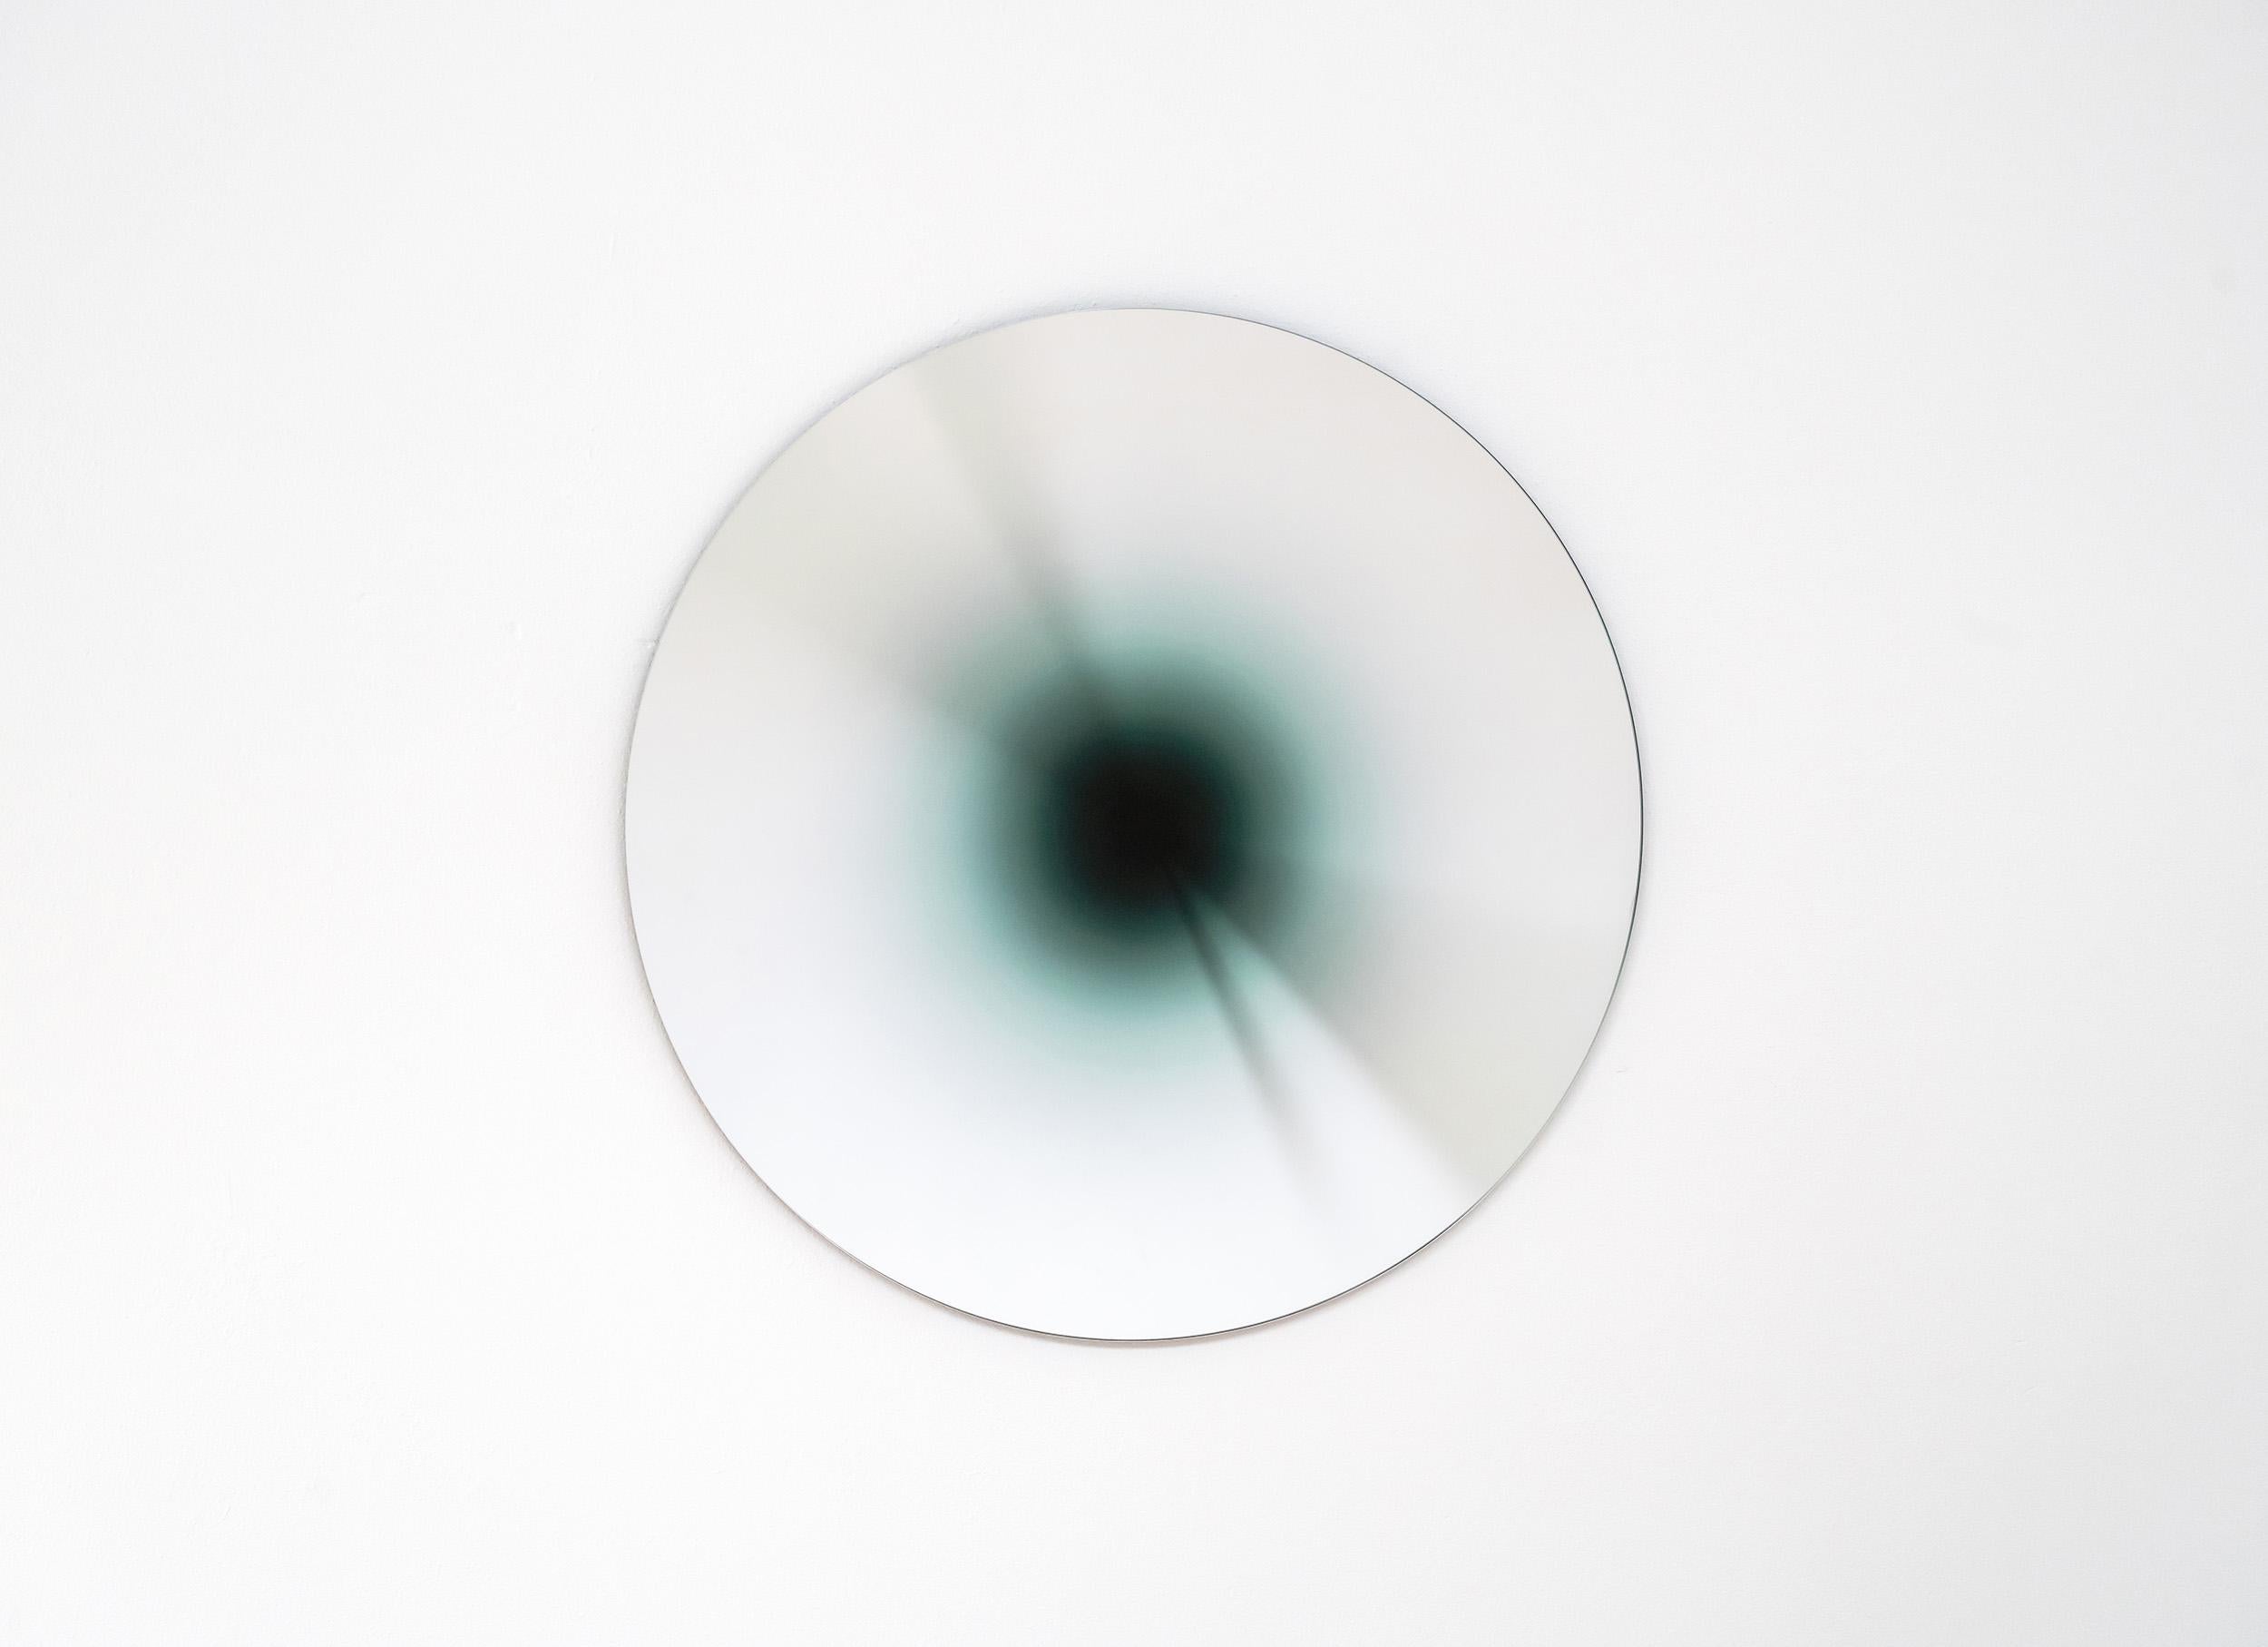 Absence is part of a limited series of glass mirrors resulting from the exploration of the absence of light. 

Its 'black-hole’ effect is created by concentric coloured gradients radiating from the centre, giving a sense of depth and endlessness.